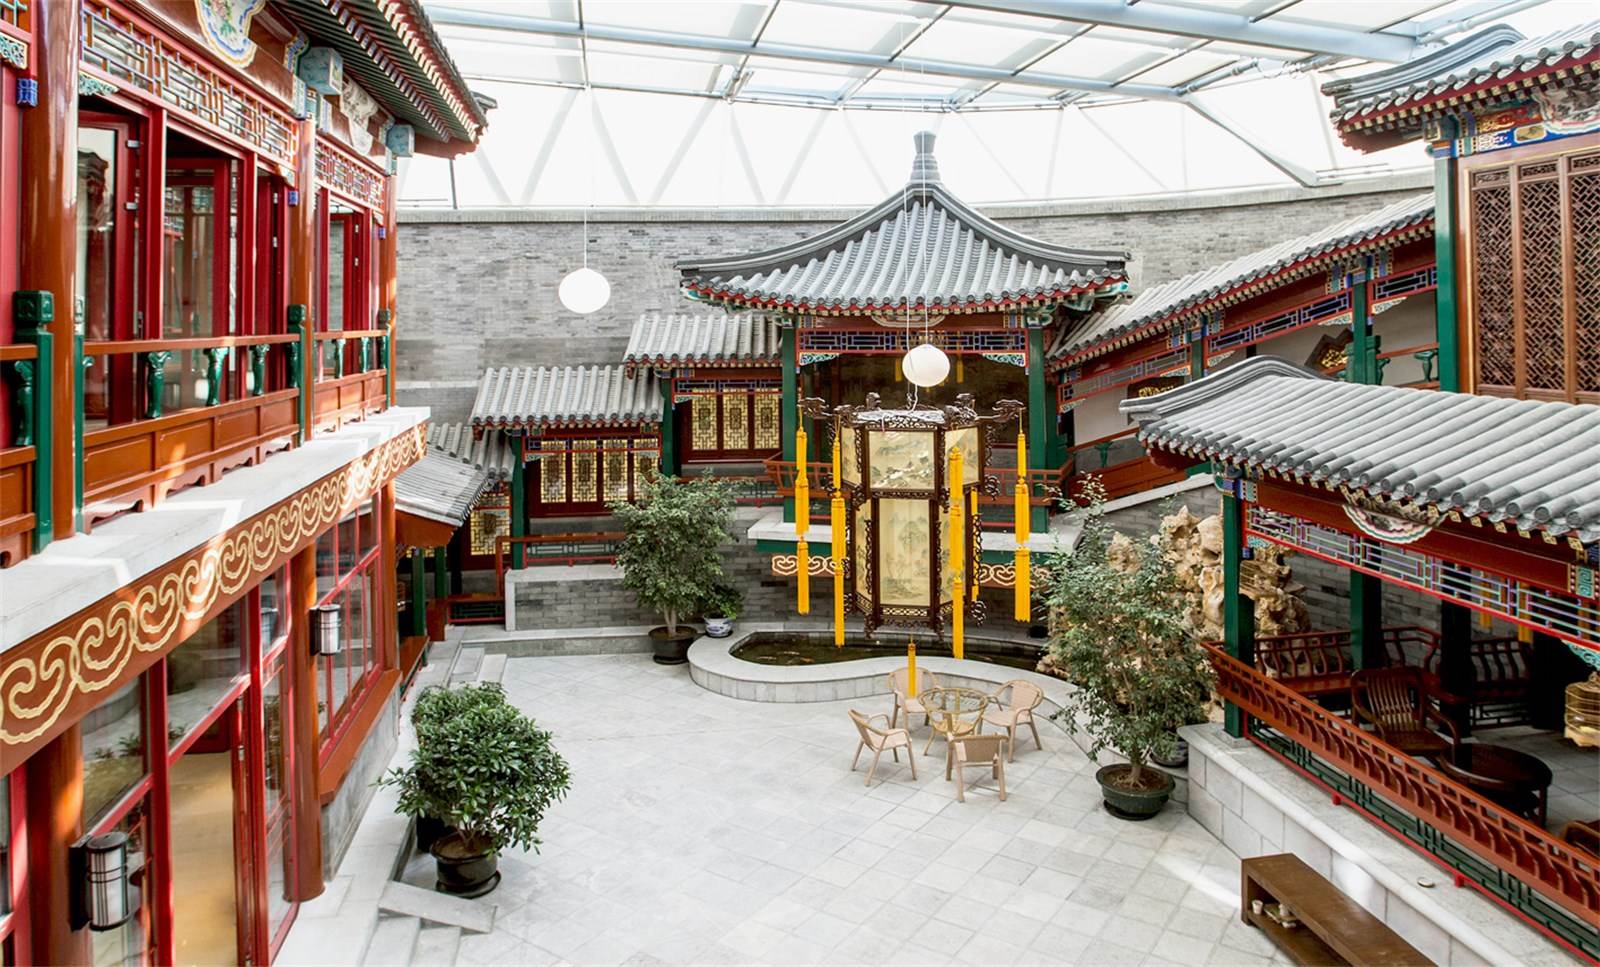 Own Your Hutong Dream Home for Just RMB 600 Million